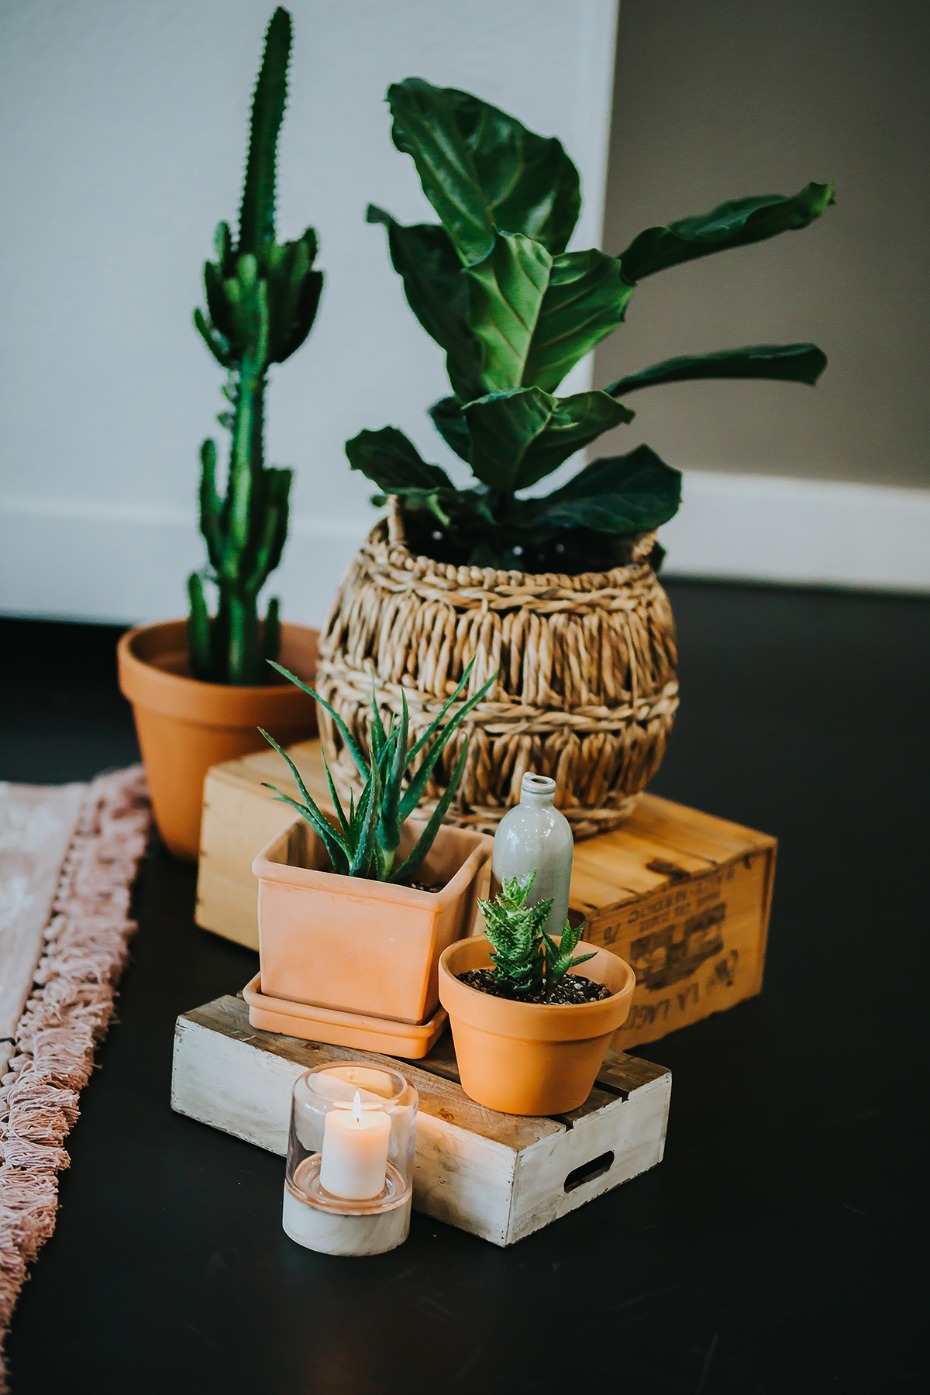 Use potted plants for your wedding